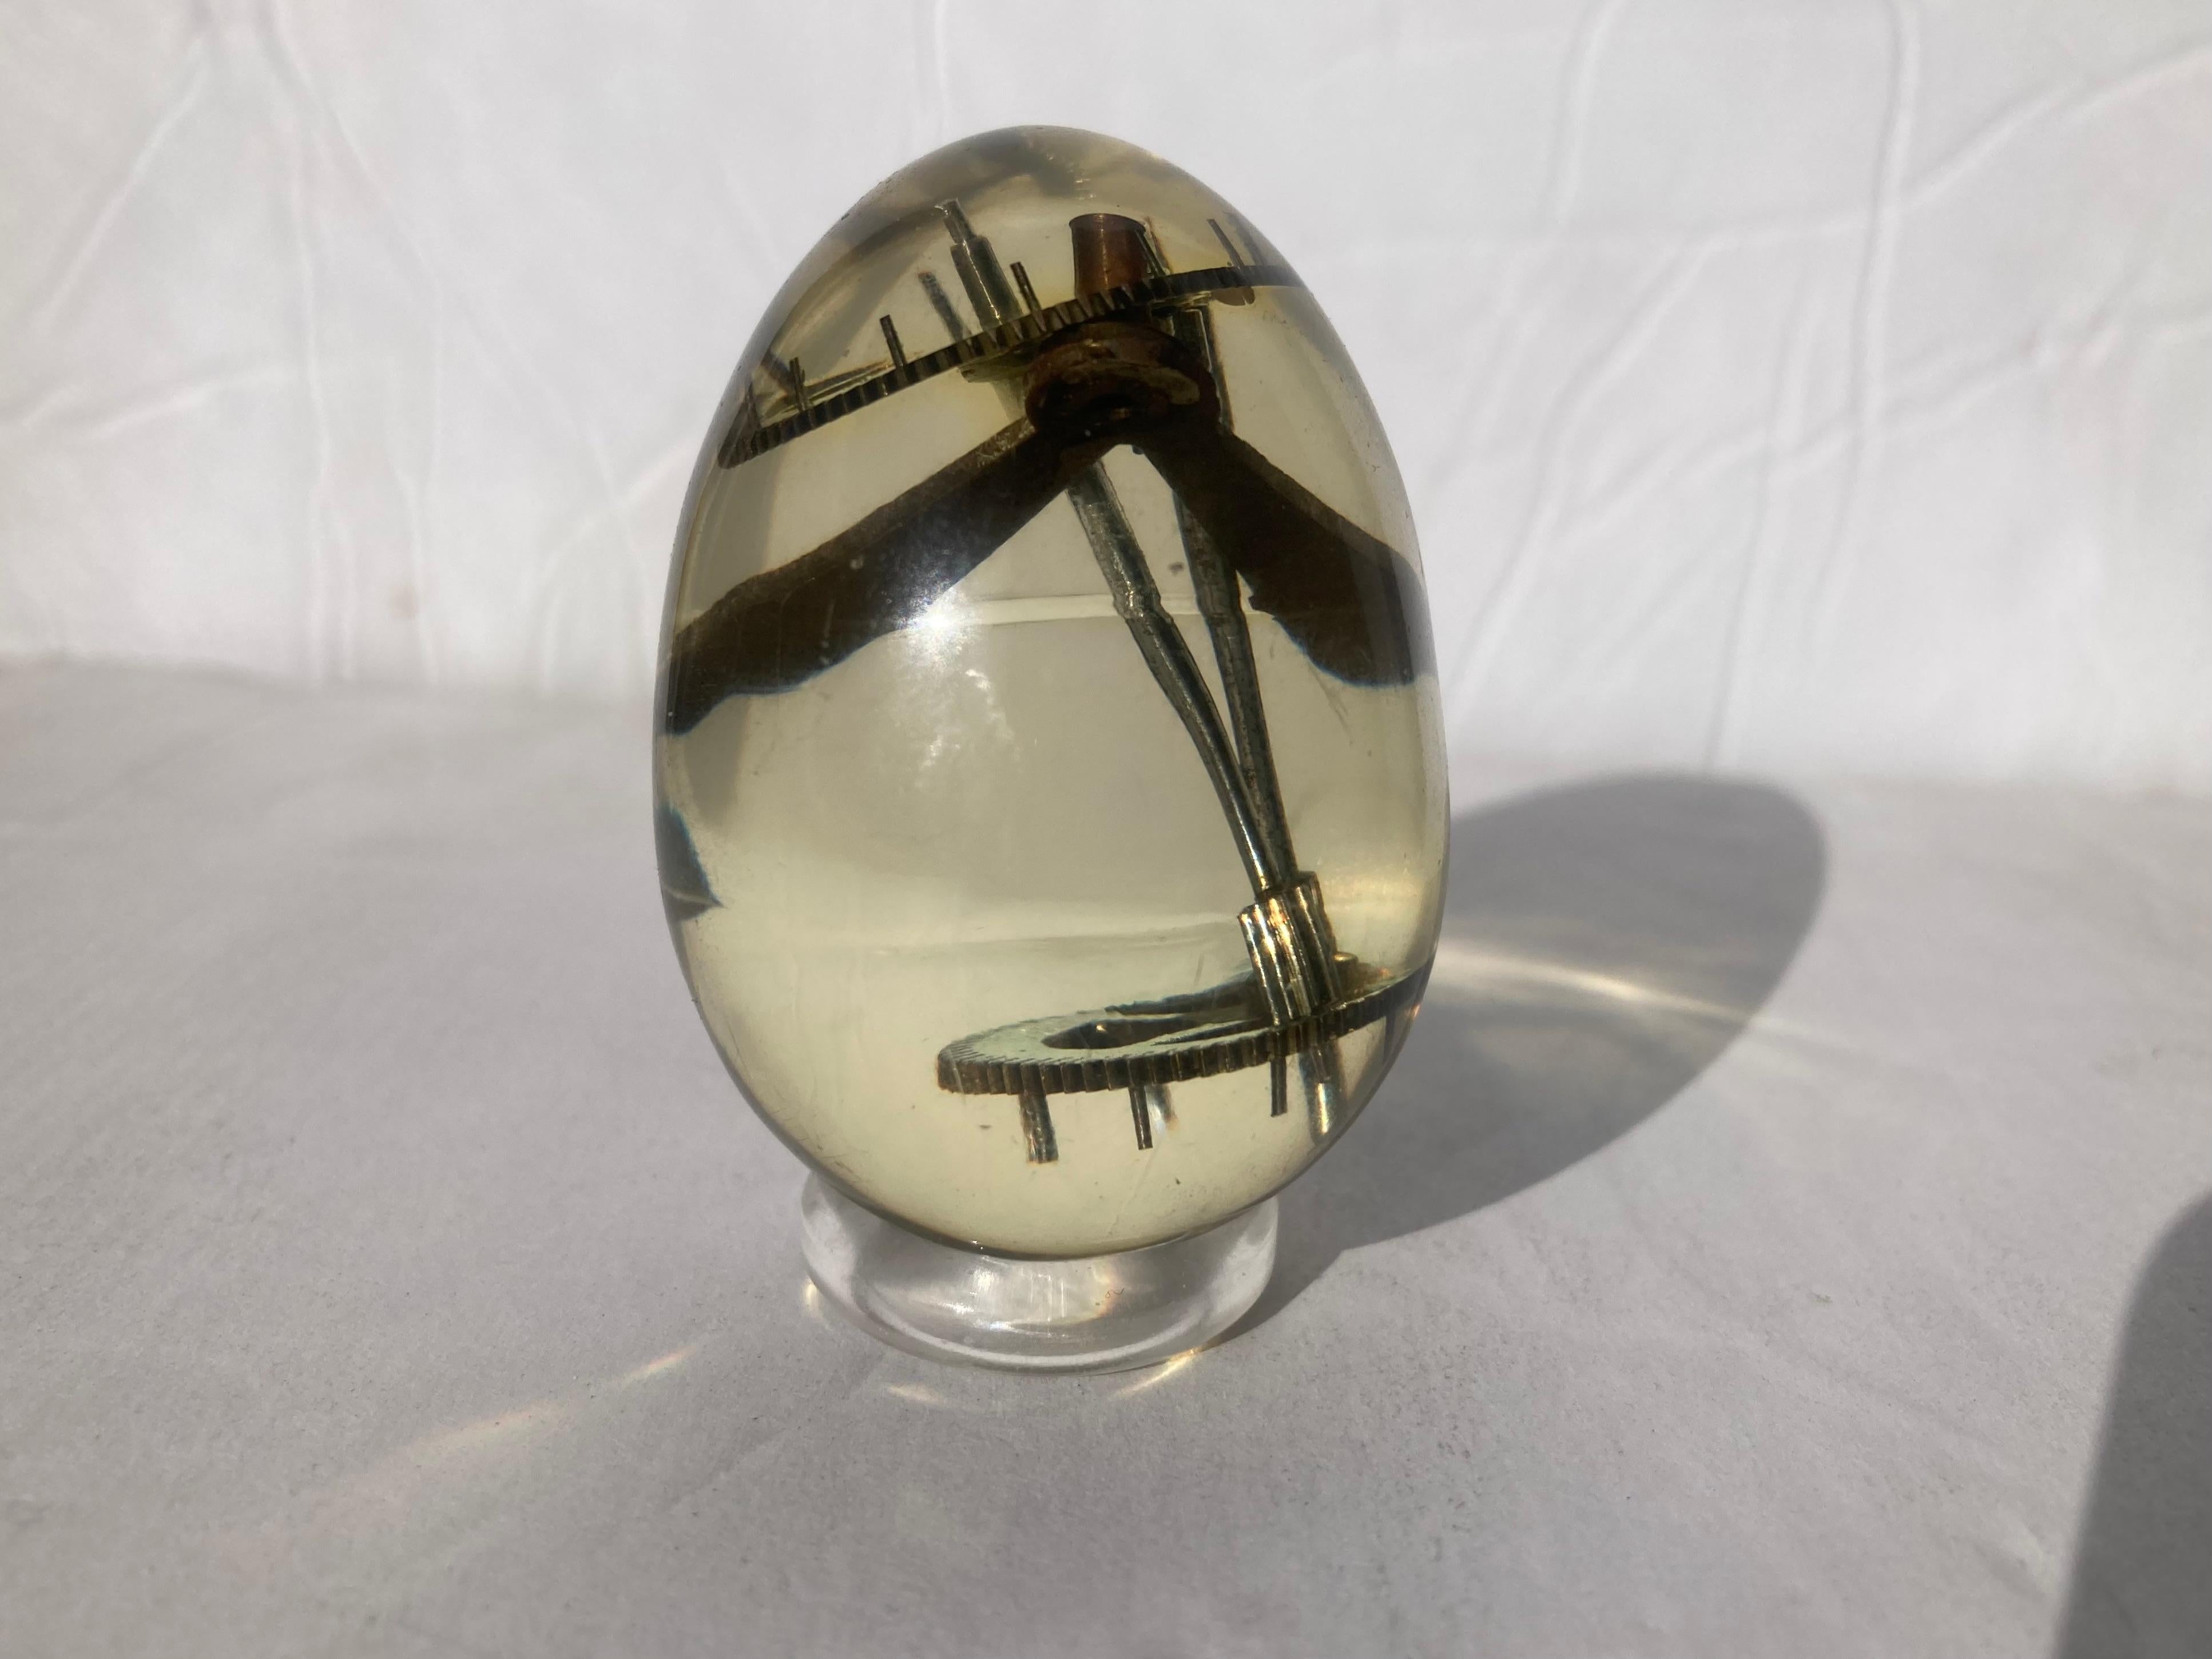 Modern Resin Egg with Clock Parts on Pierre GIRAUDON  Sculpture /Ornament / Paperweight For Sale